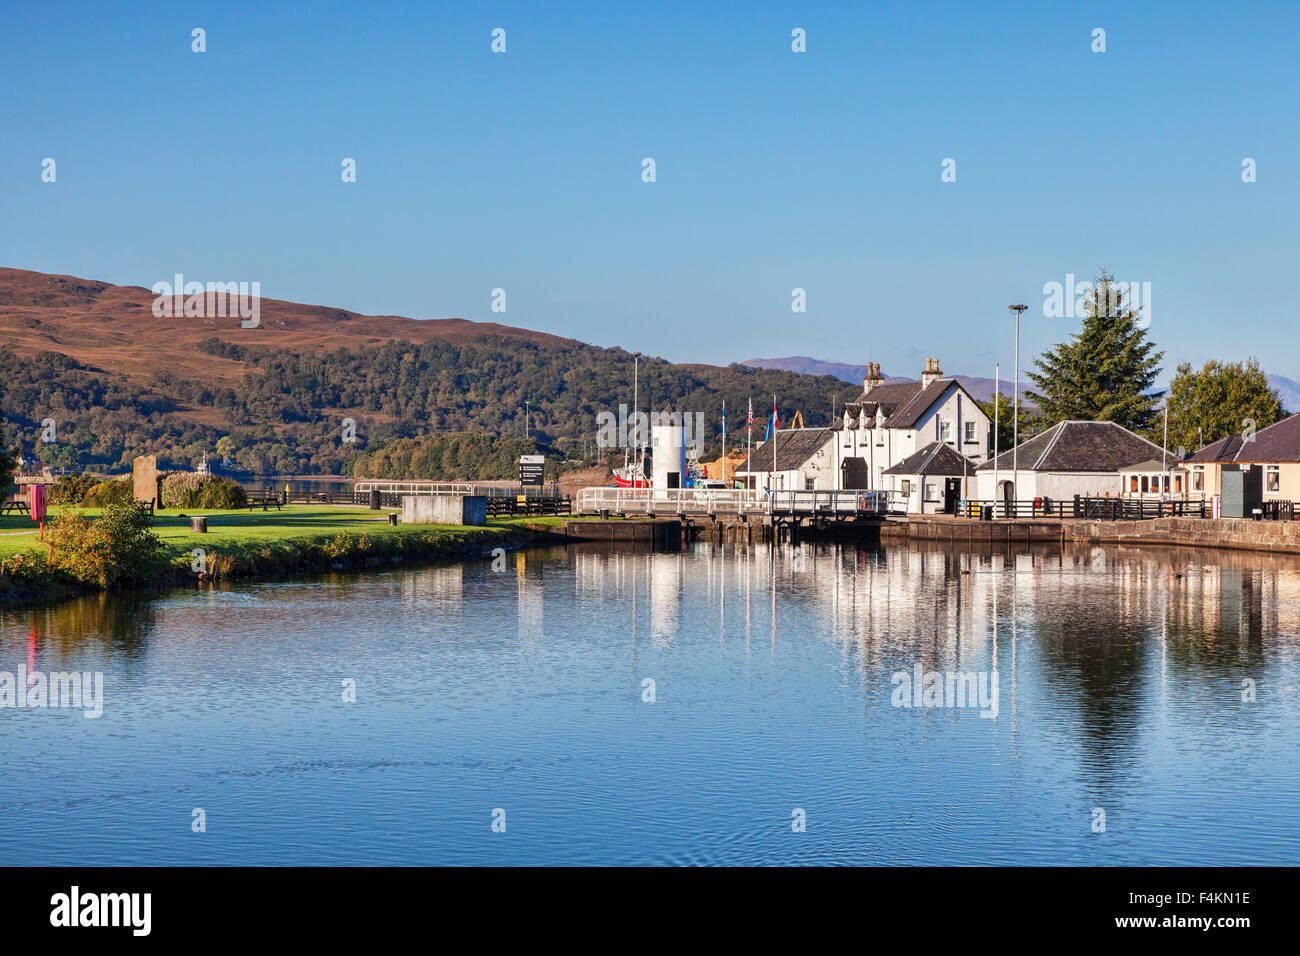 The Lock-Keepers house and the Lighthouse at Corpach, the final lock on the Caledonian Canal, Highland, Scotland, UK Stock Photo